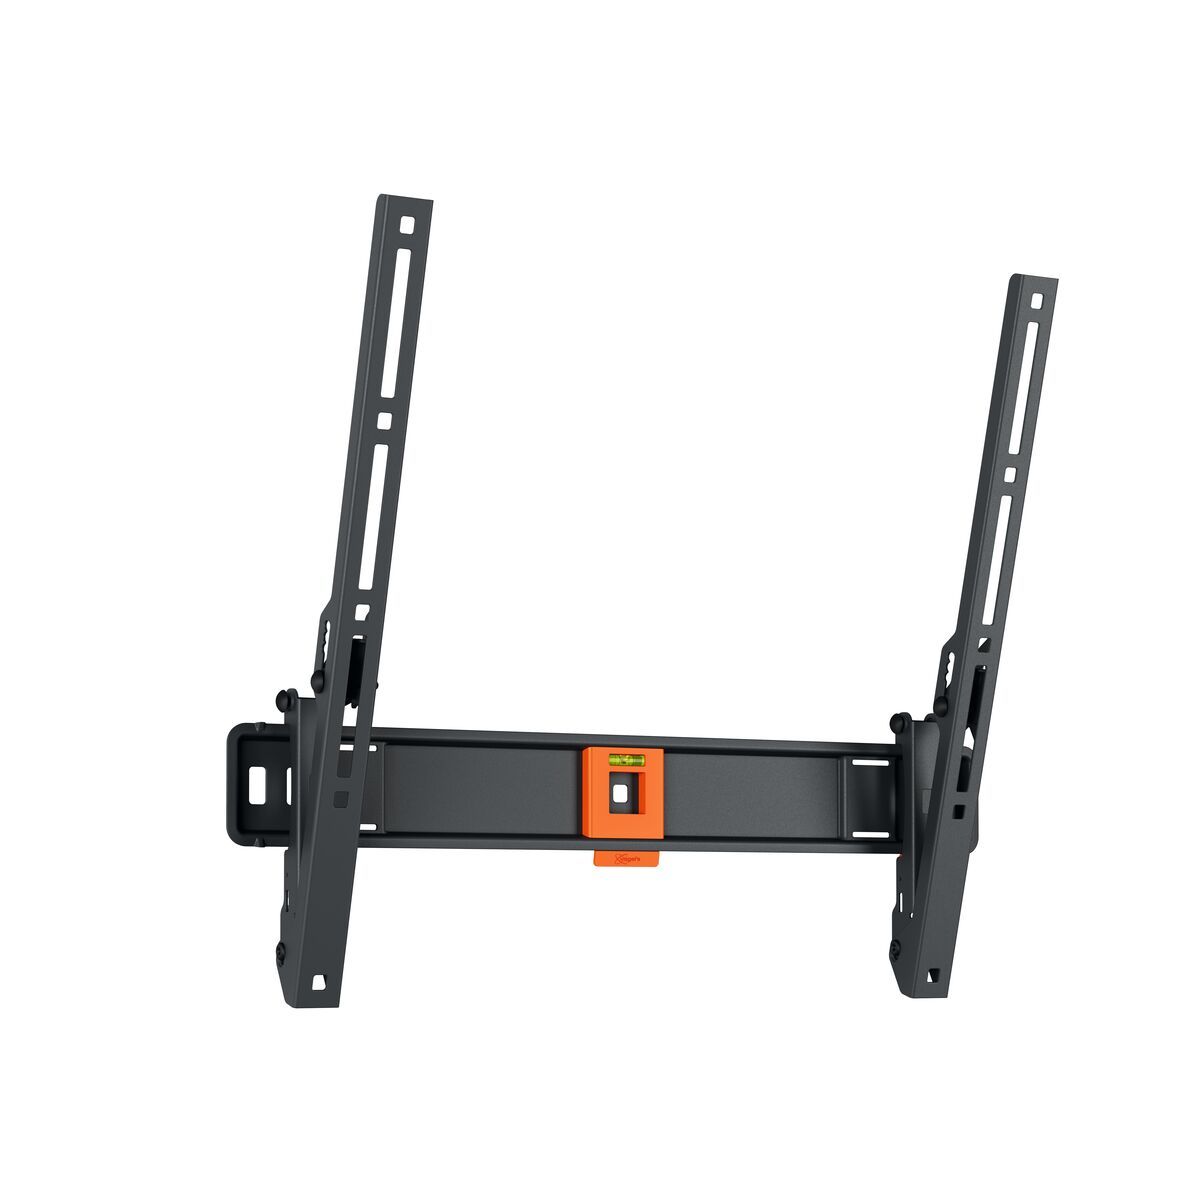 Vogel's TVM 1413 Tilting TV Wall Mount - Suitable for 32 up to 65 inch TVs - Tilt up to 15° - Product